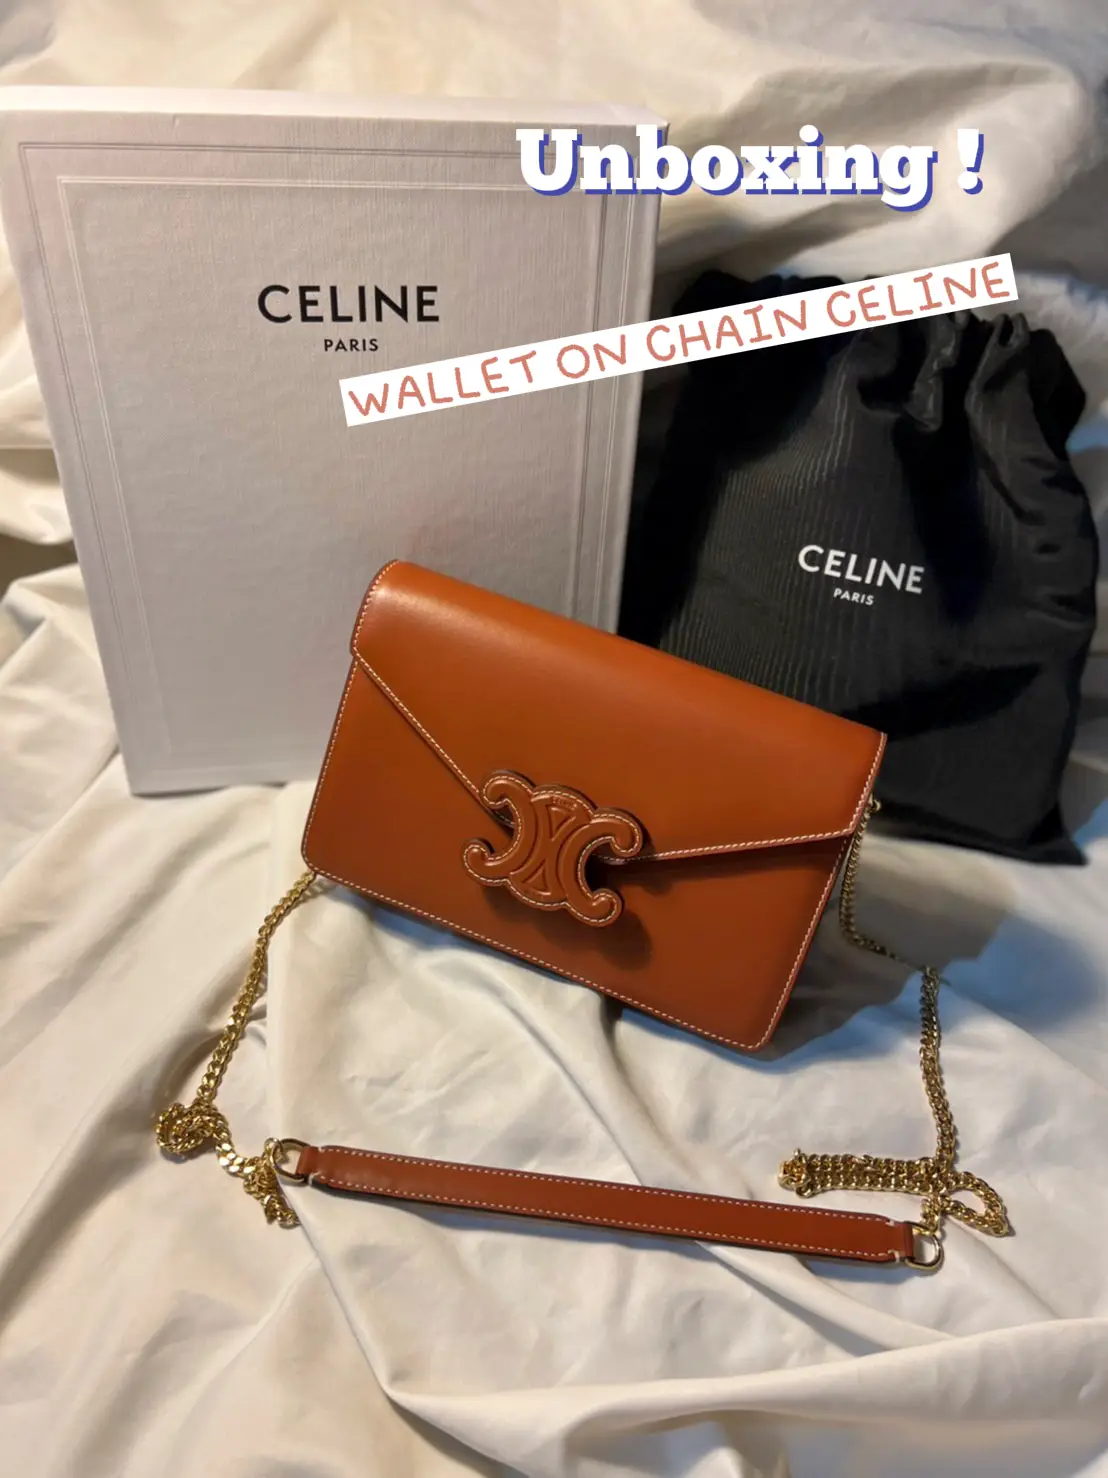 Unboxing ✨WALLET ON CHAIN CELINE, Gallery posted by W965